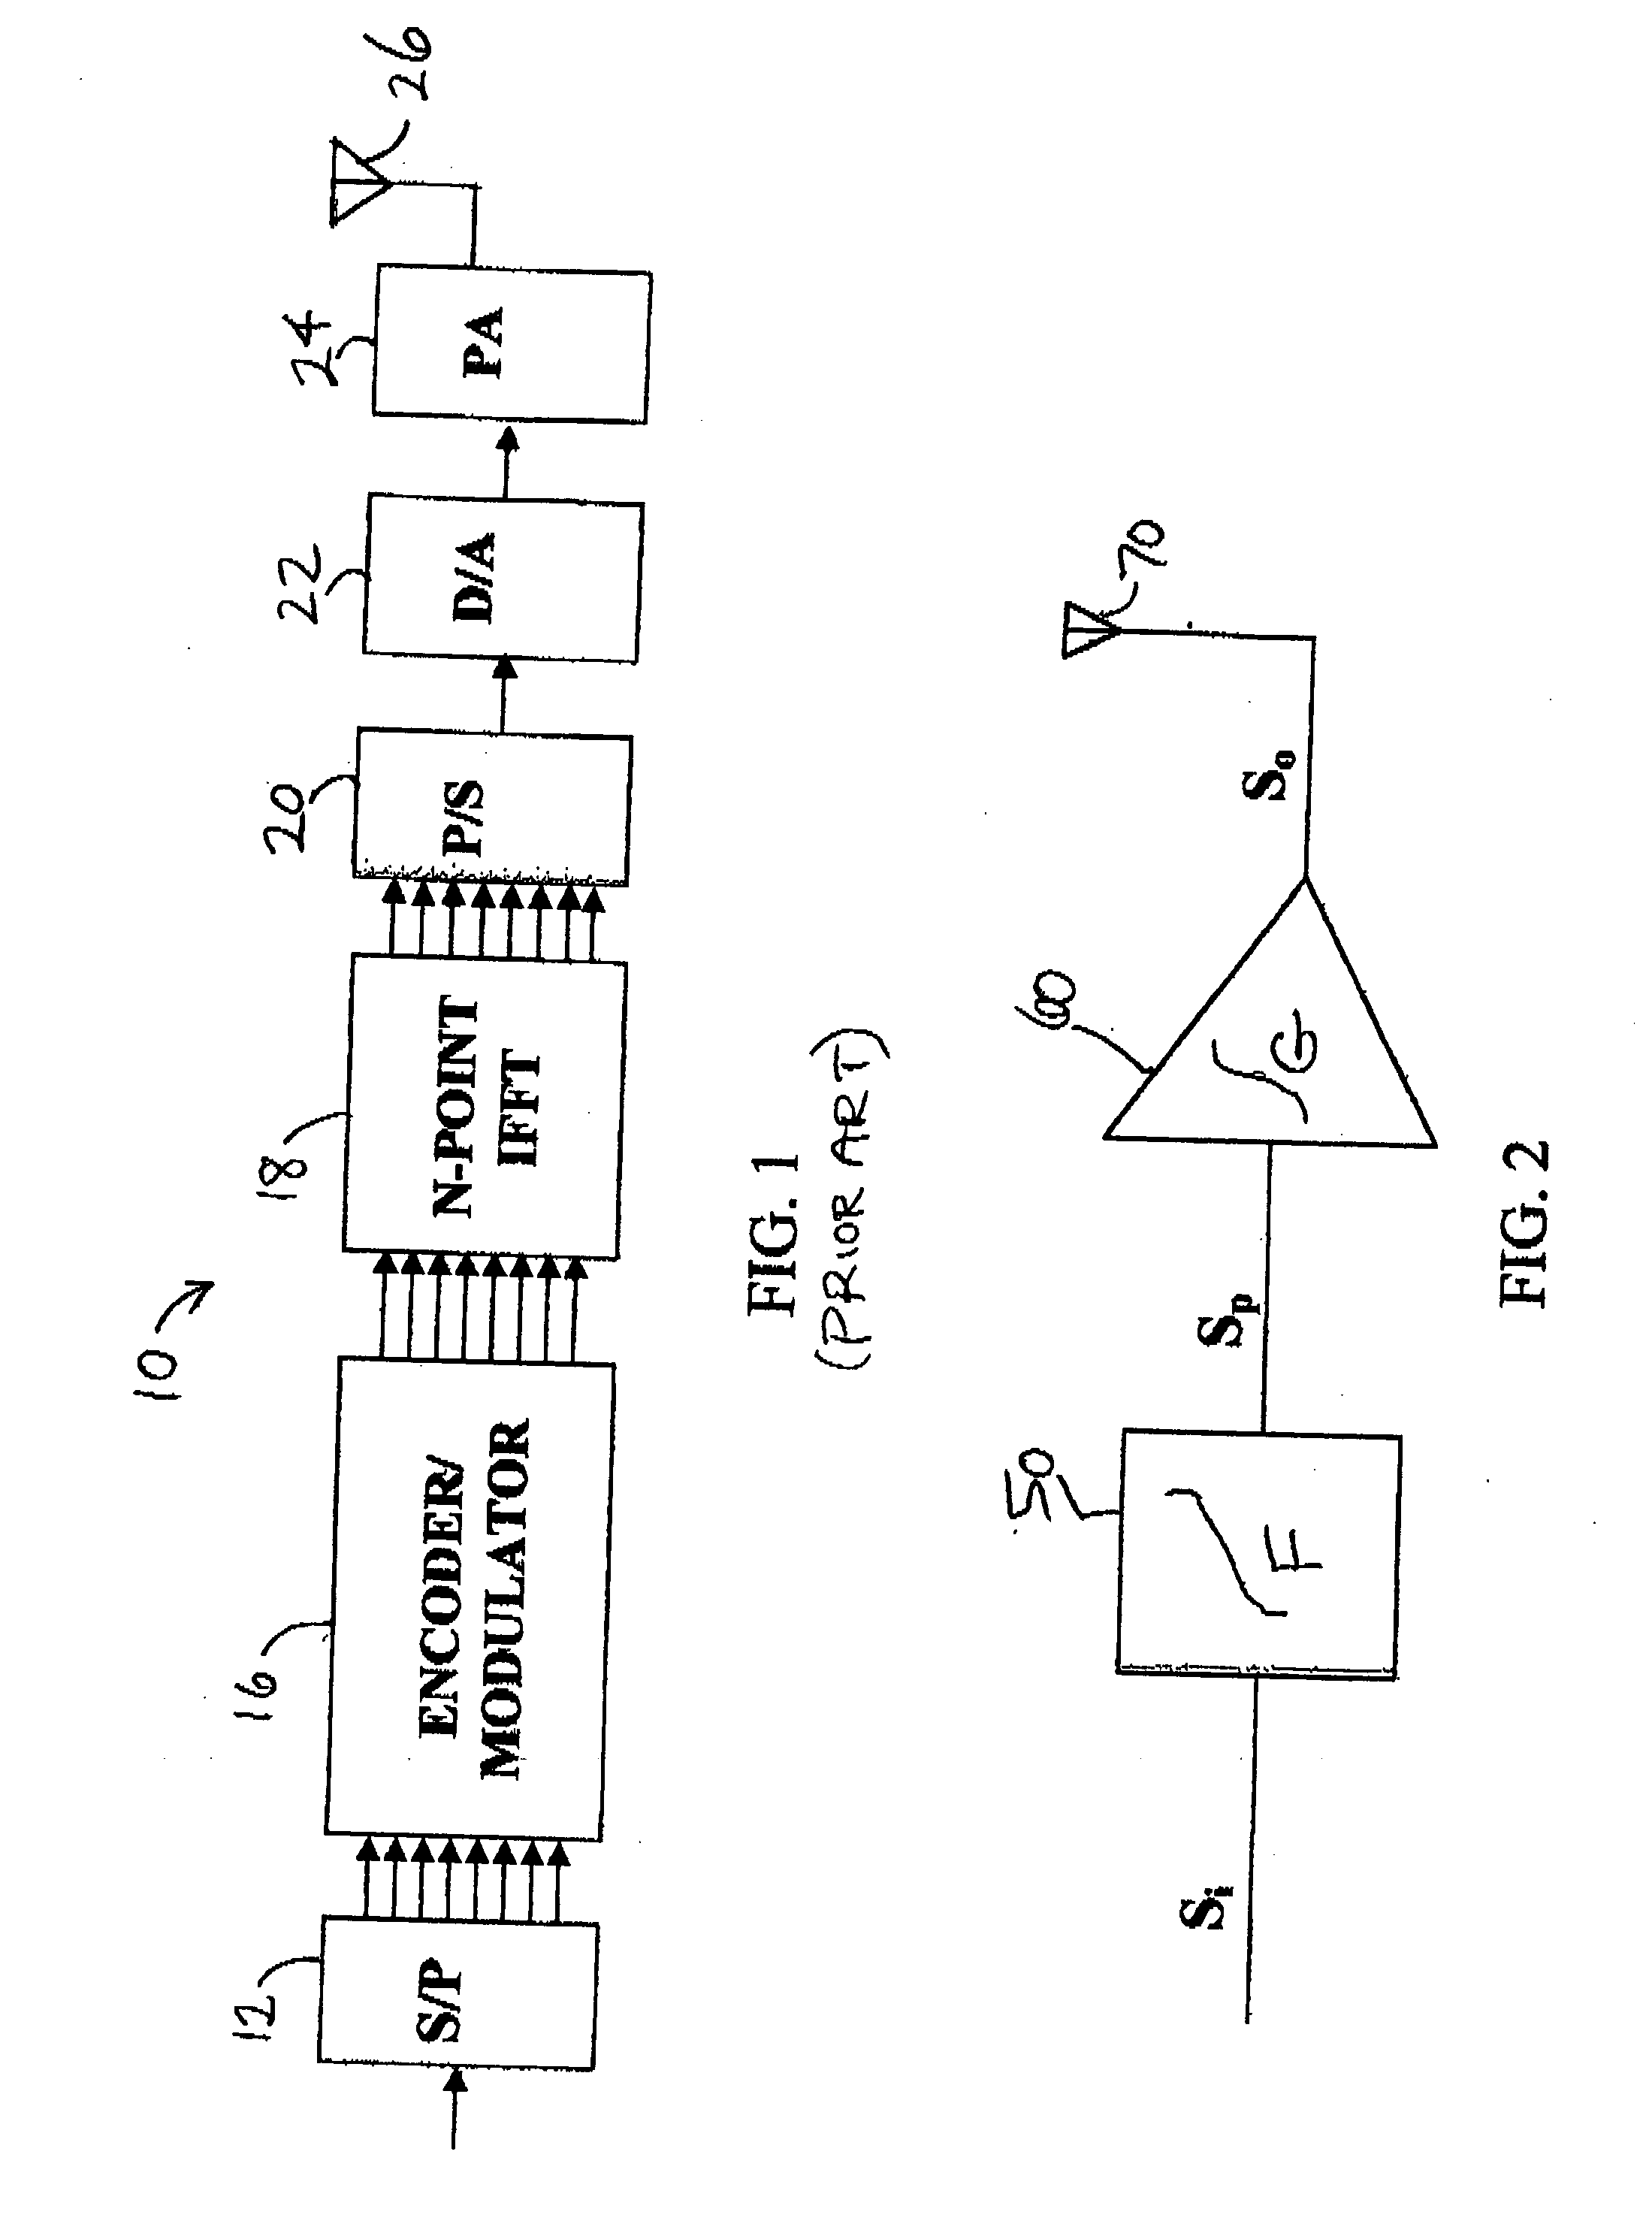 Power amplifier linearization methods and apparatus using predistortion in the frequency domain